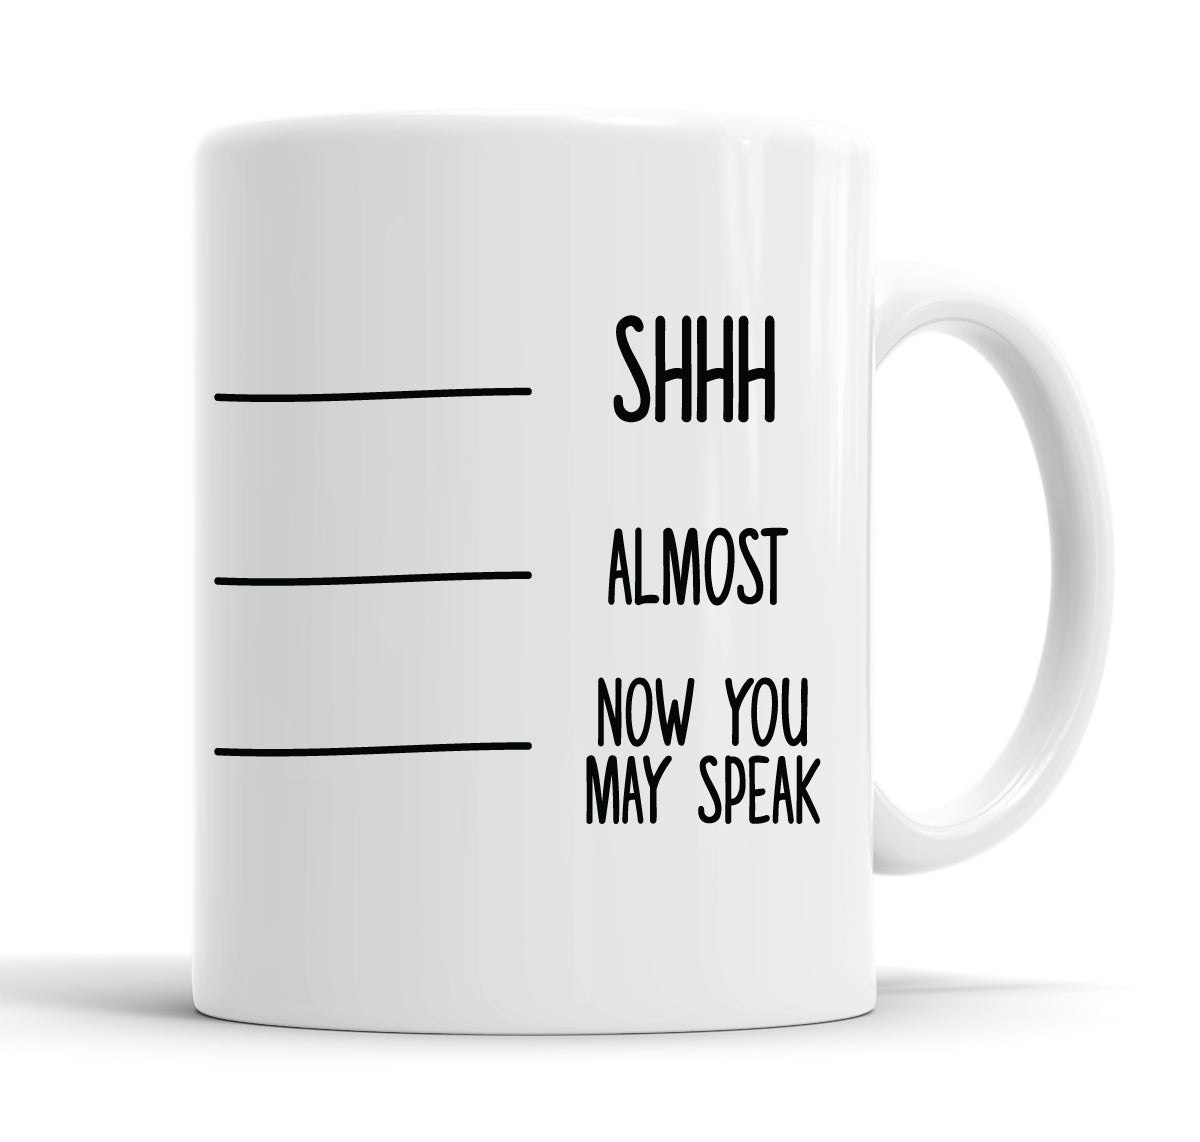 Shh, Almost, Now You May Speak Funny Slogan Mug Tea Cup Coffee